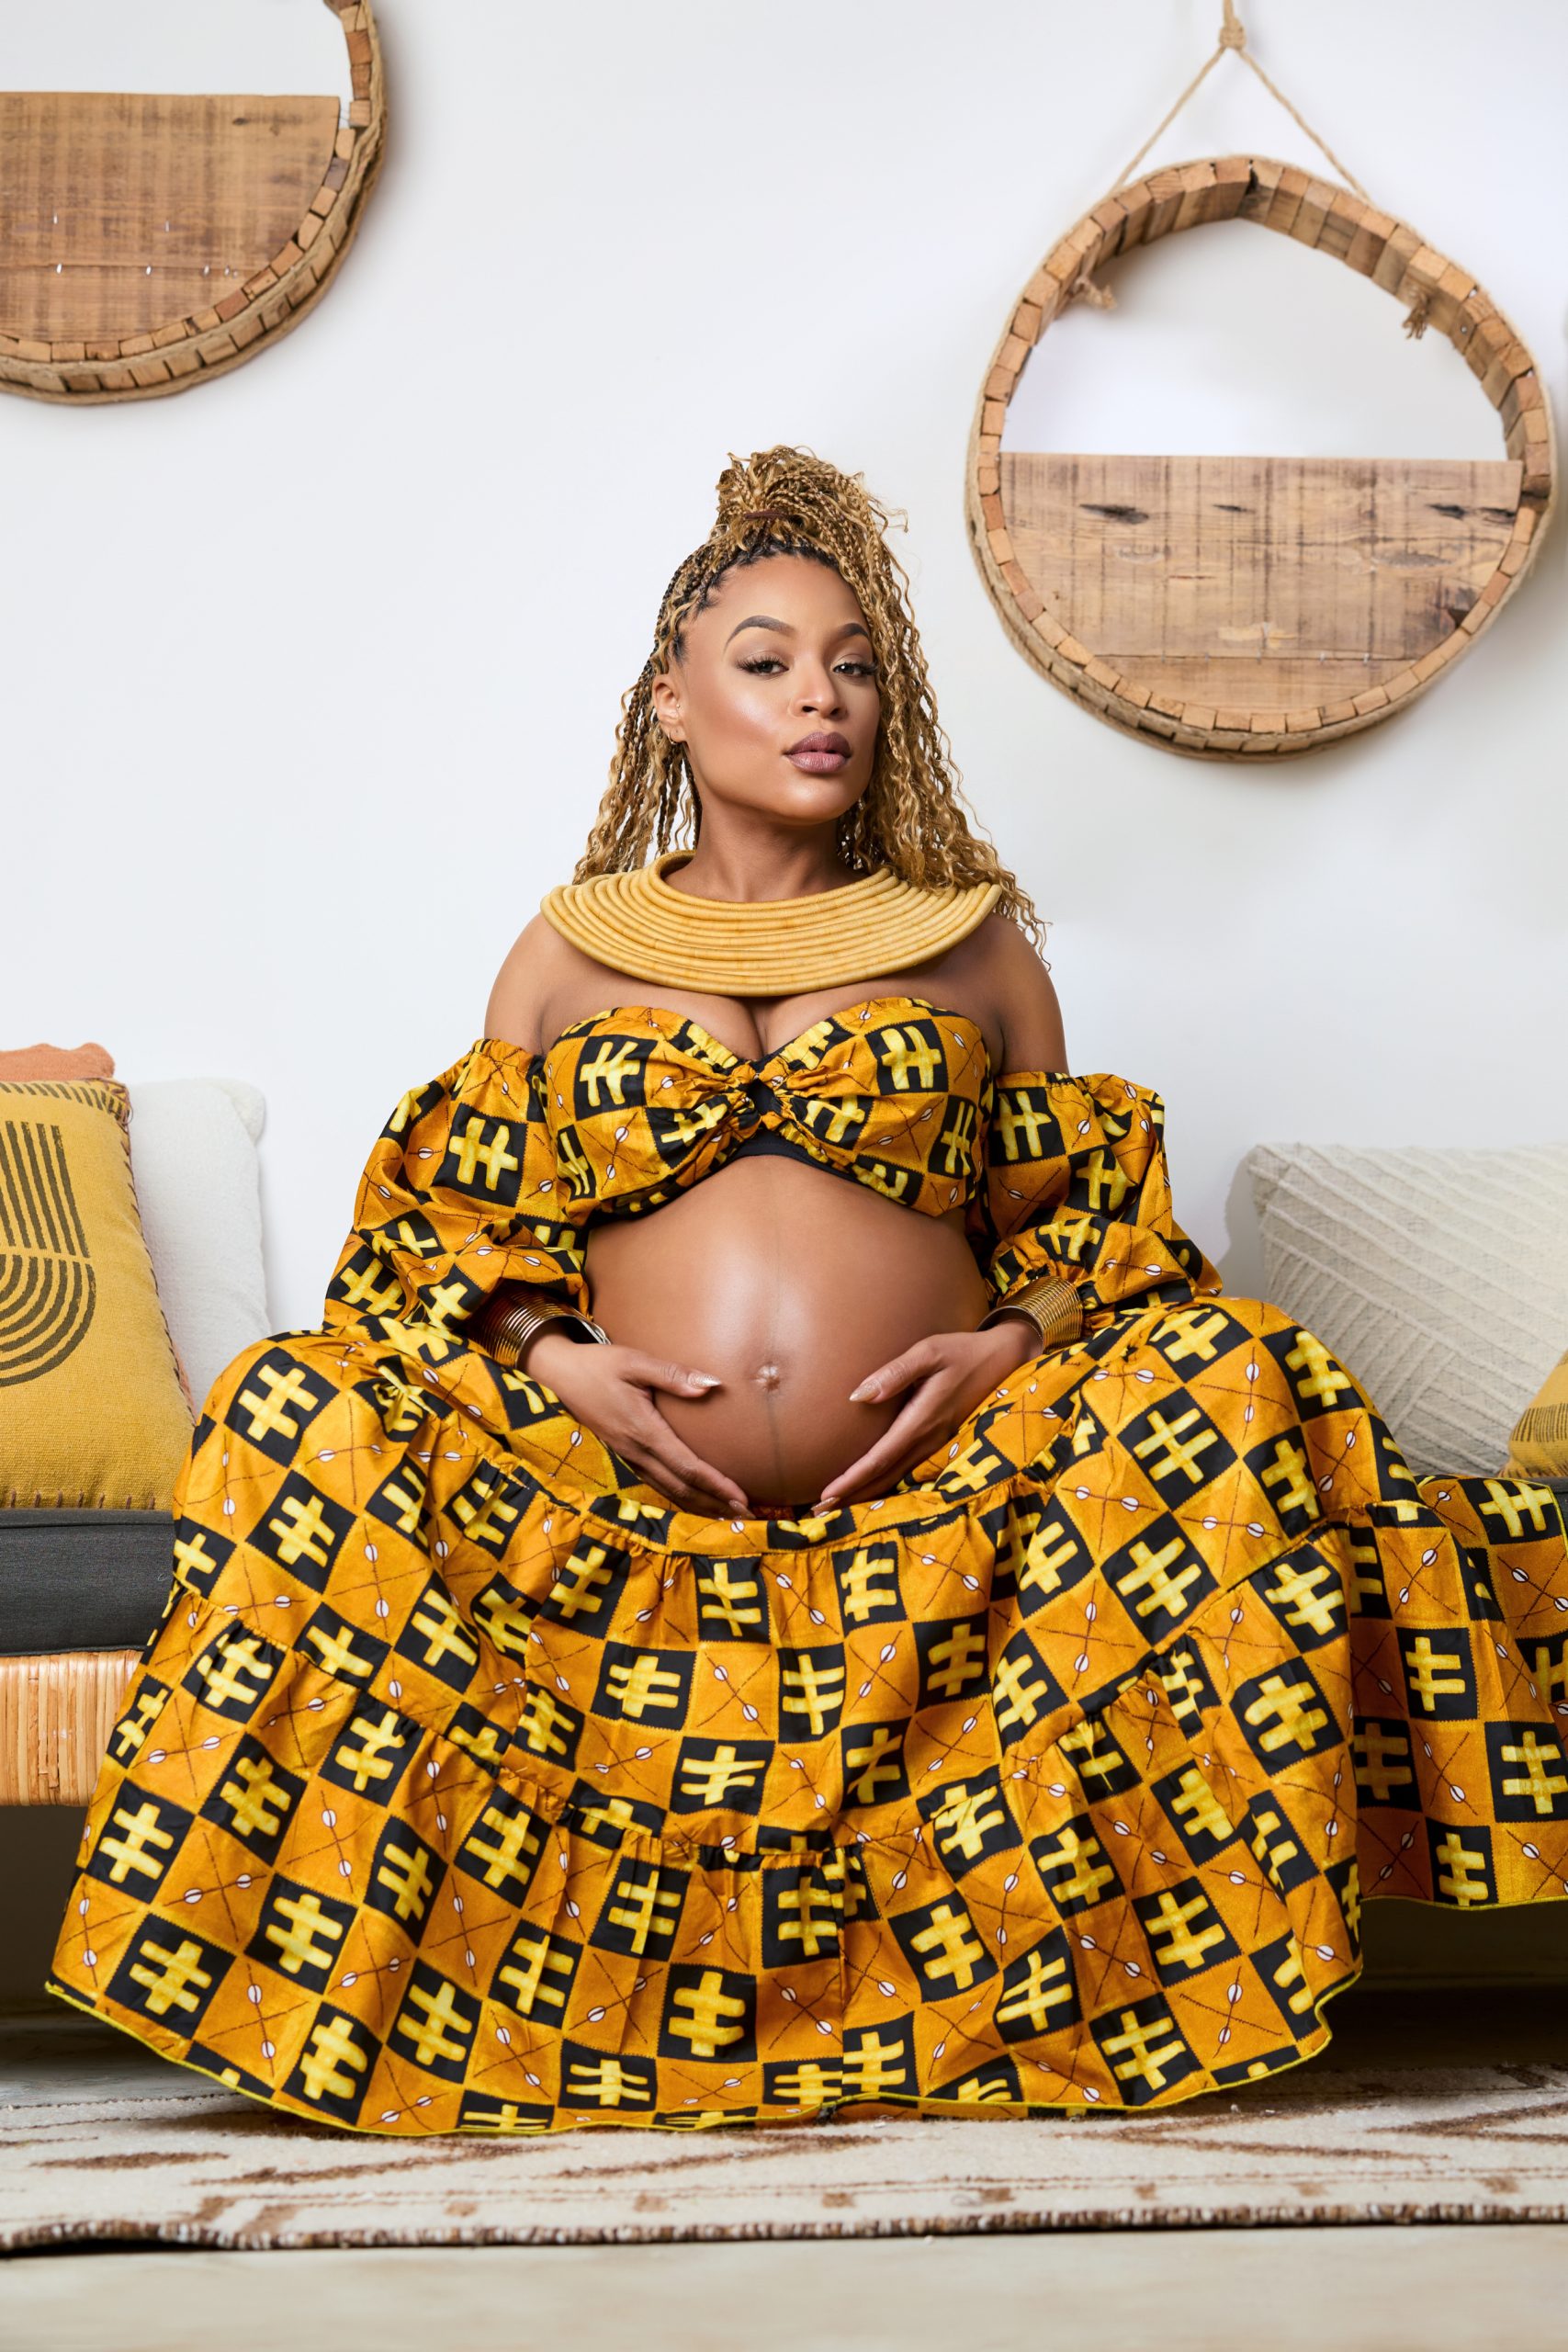 Exclusive: 'The Gilded Age' Director Crystle Roberson Dorsey's Maternity Photos Are A Work Of Art